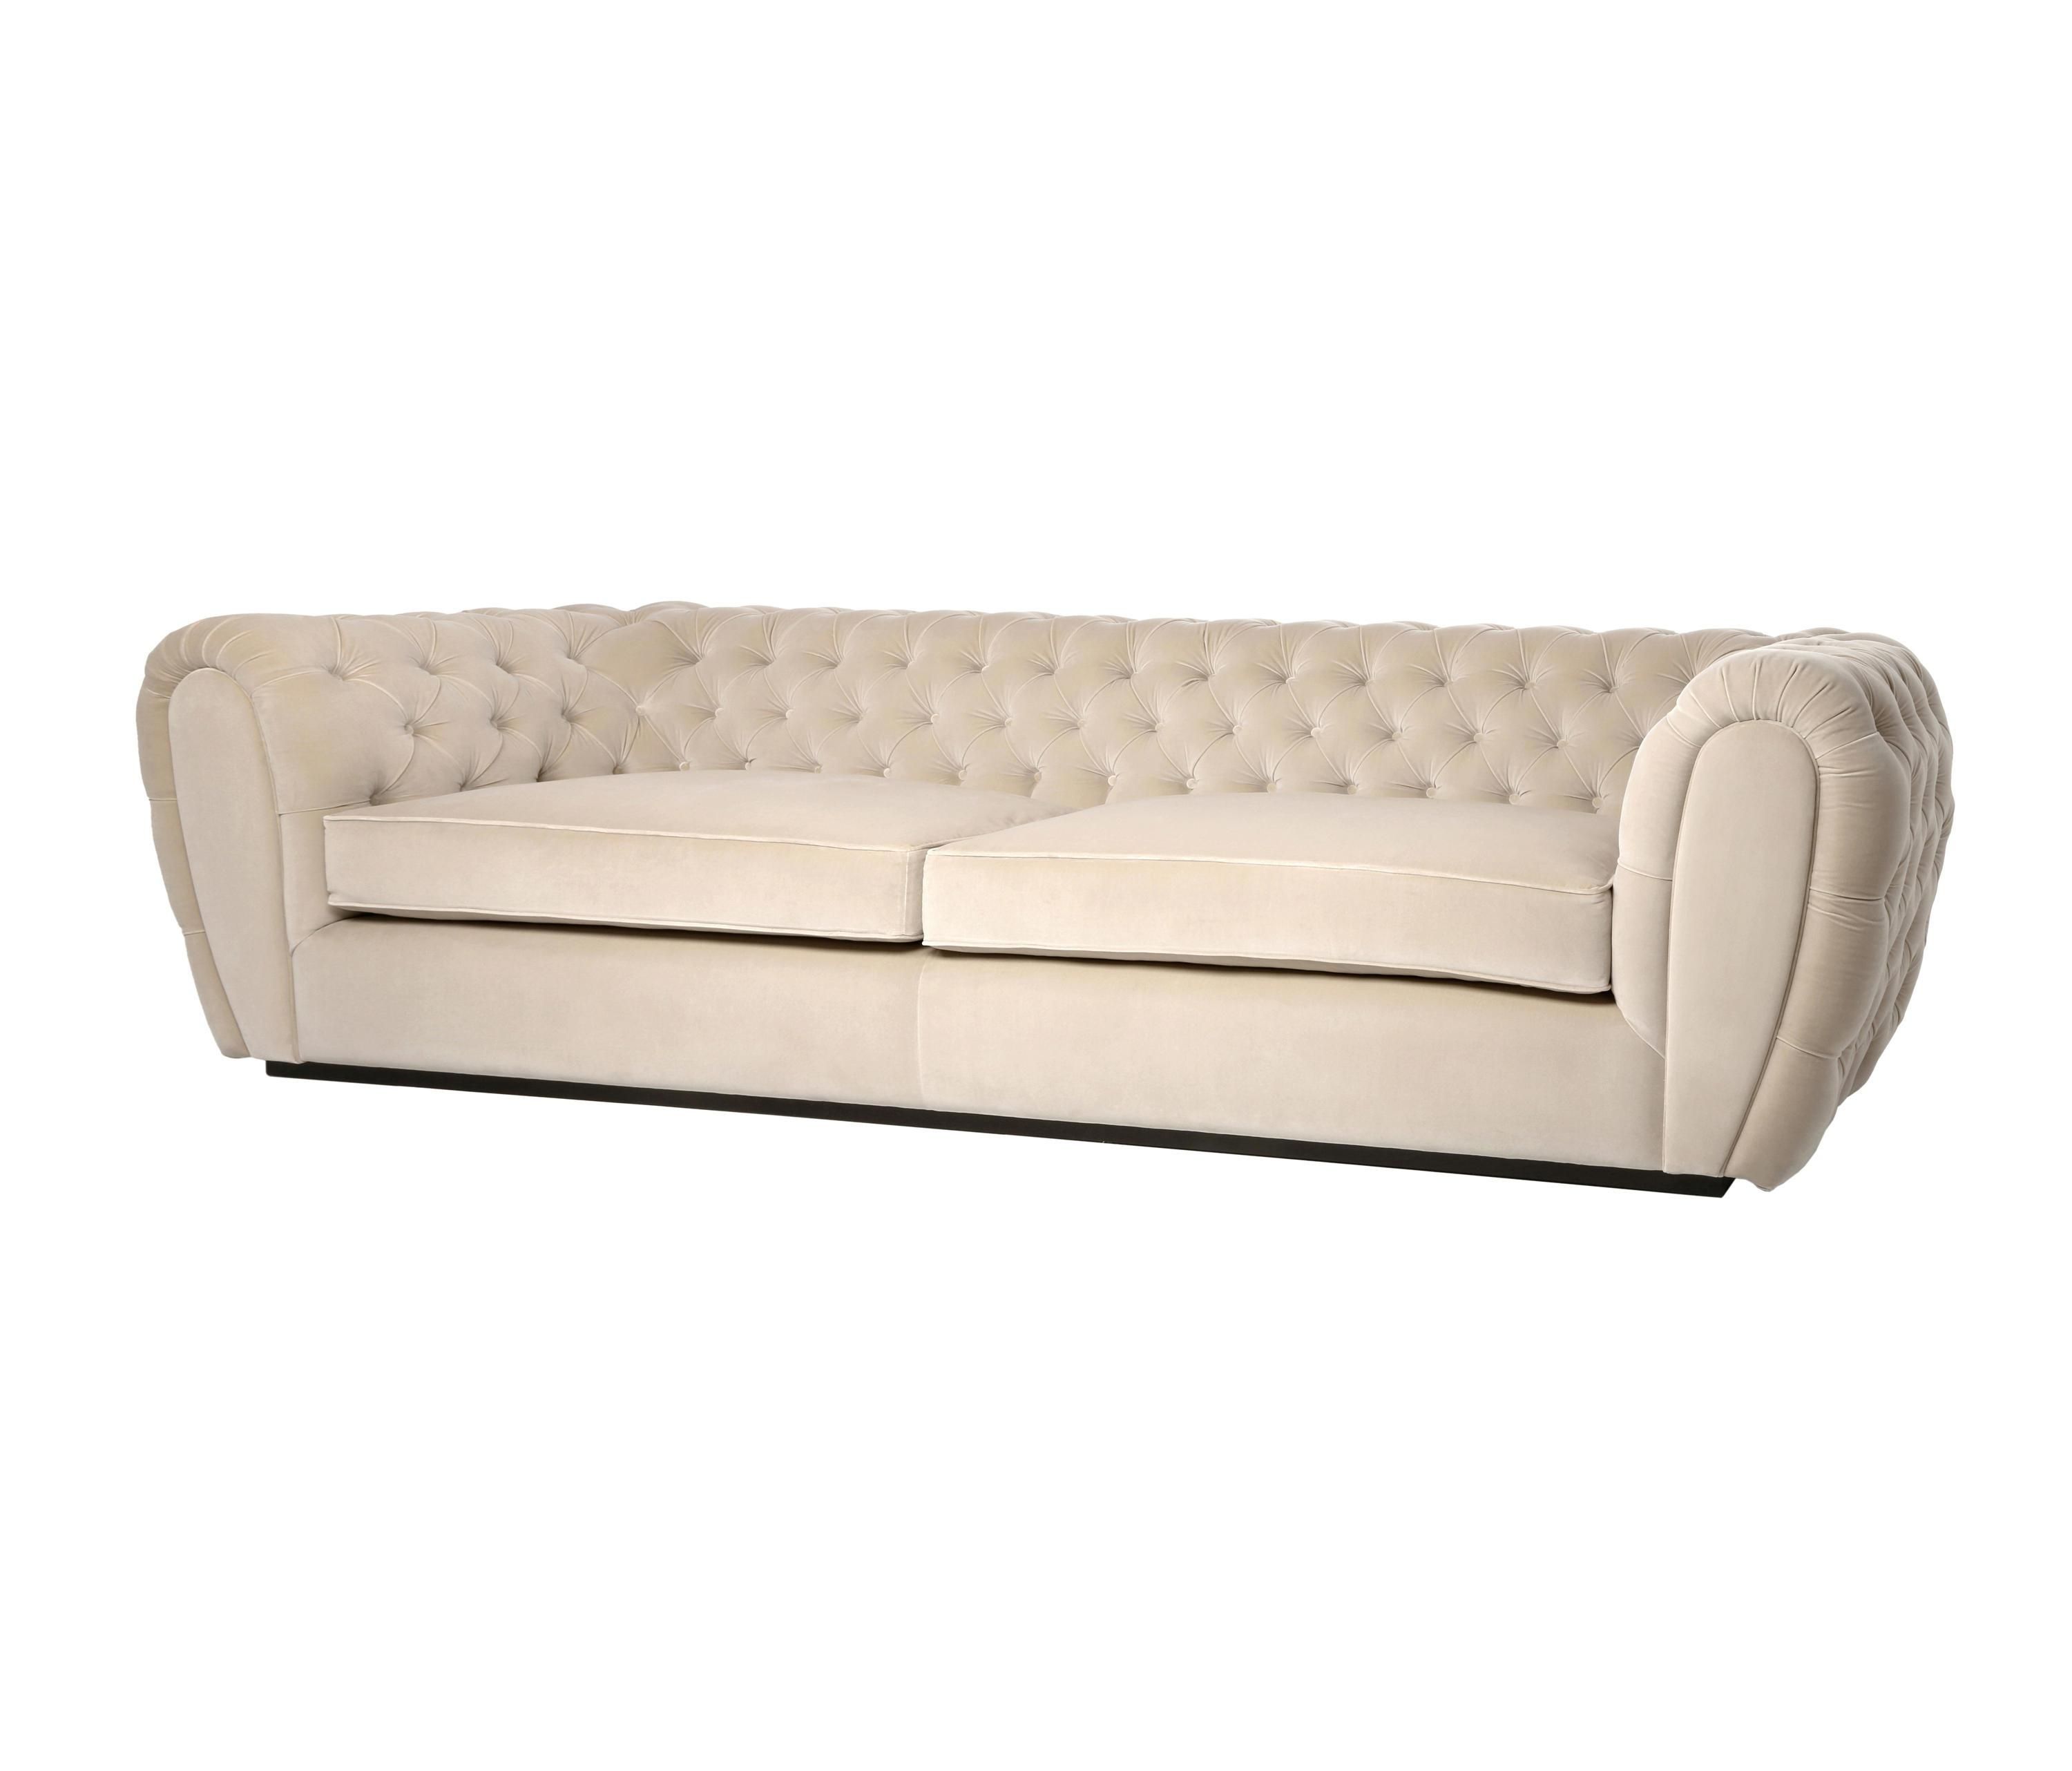 Windsor Sofa – Lounge Sofas From The Sofa & Chair Company Ltd In Windsor Sofas (View 9 of 20)